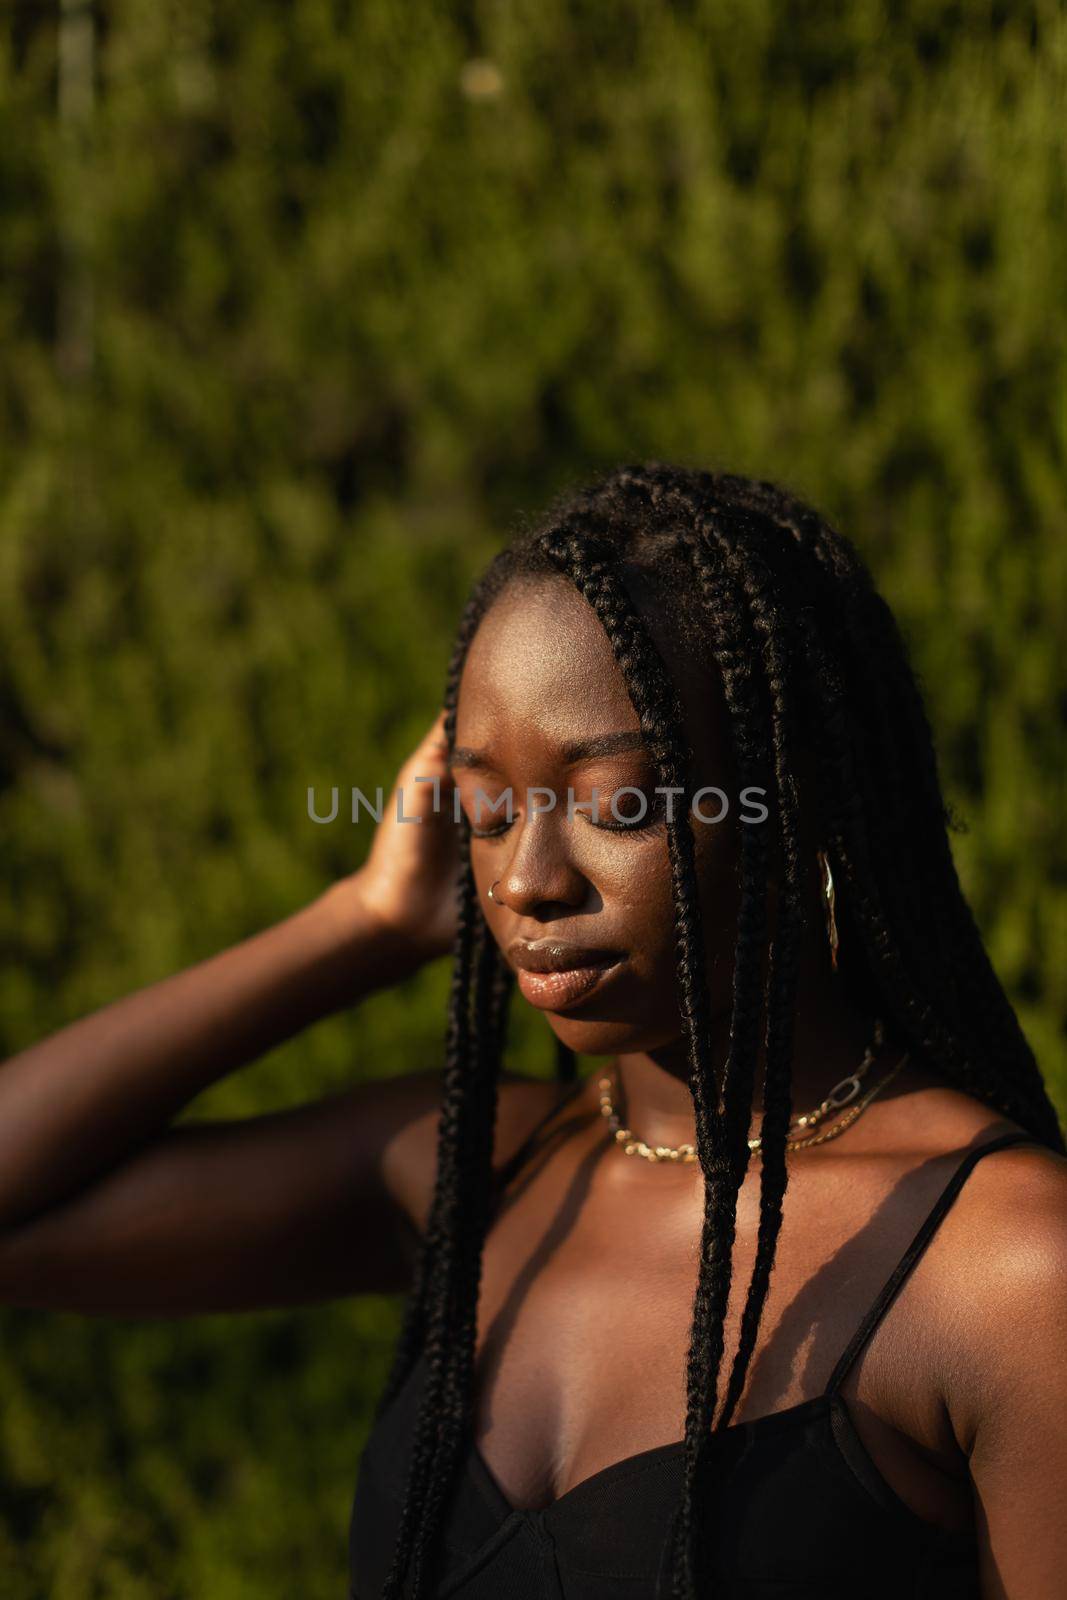 Portrait of a young black female removing her hair from her face whit her eyes closed by stockrojoverdeyazul